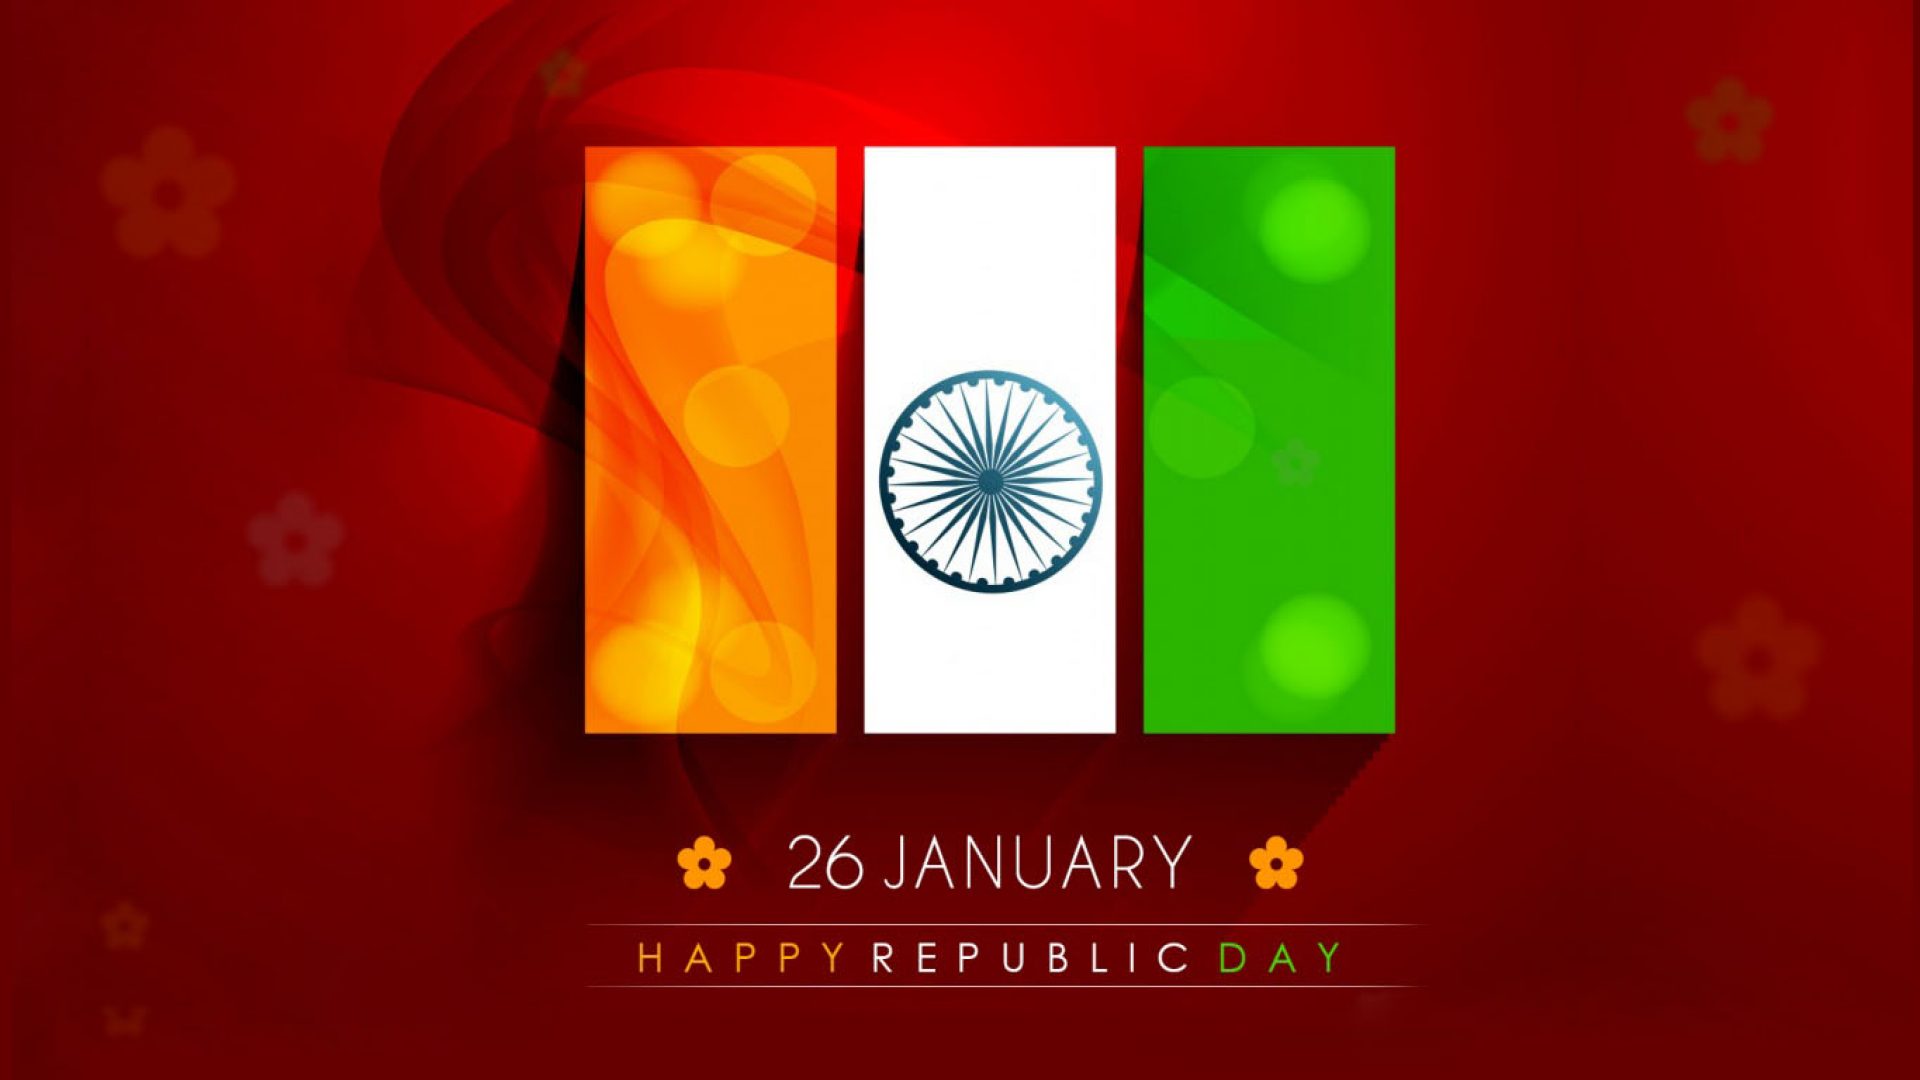 Happy Republic Day Wallpaper Pictures 1920×1080 Republic Day Of India  1366×768 | Festivals